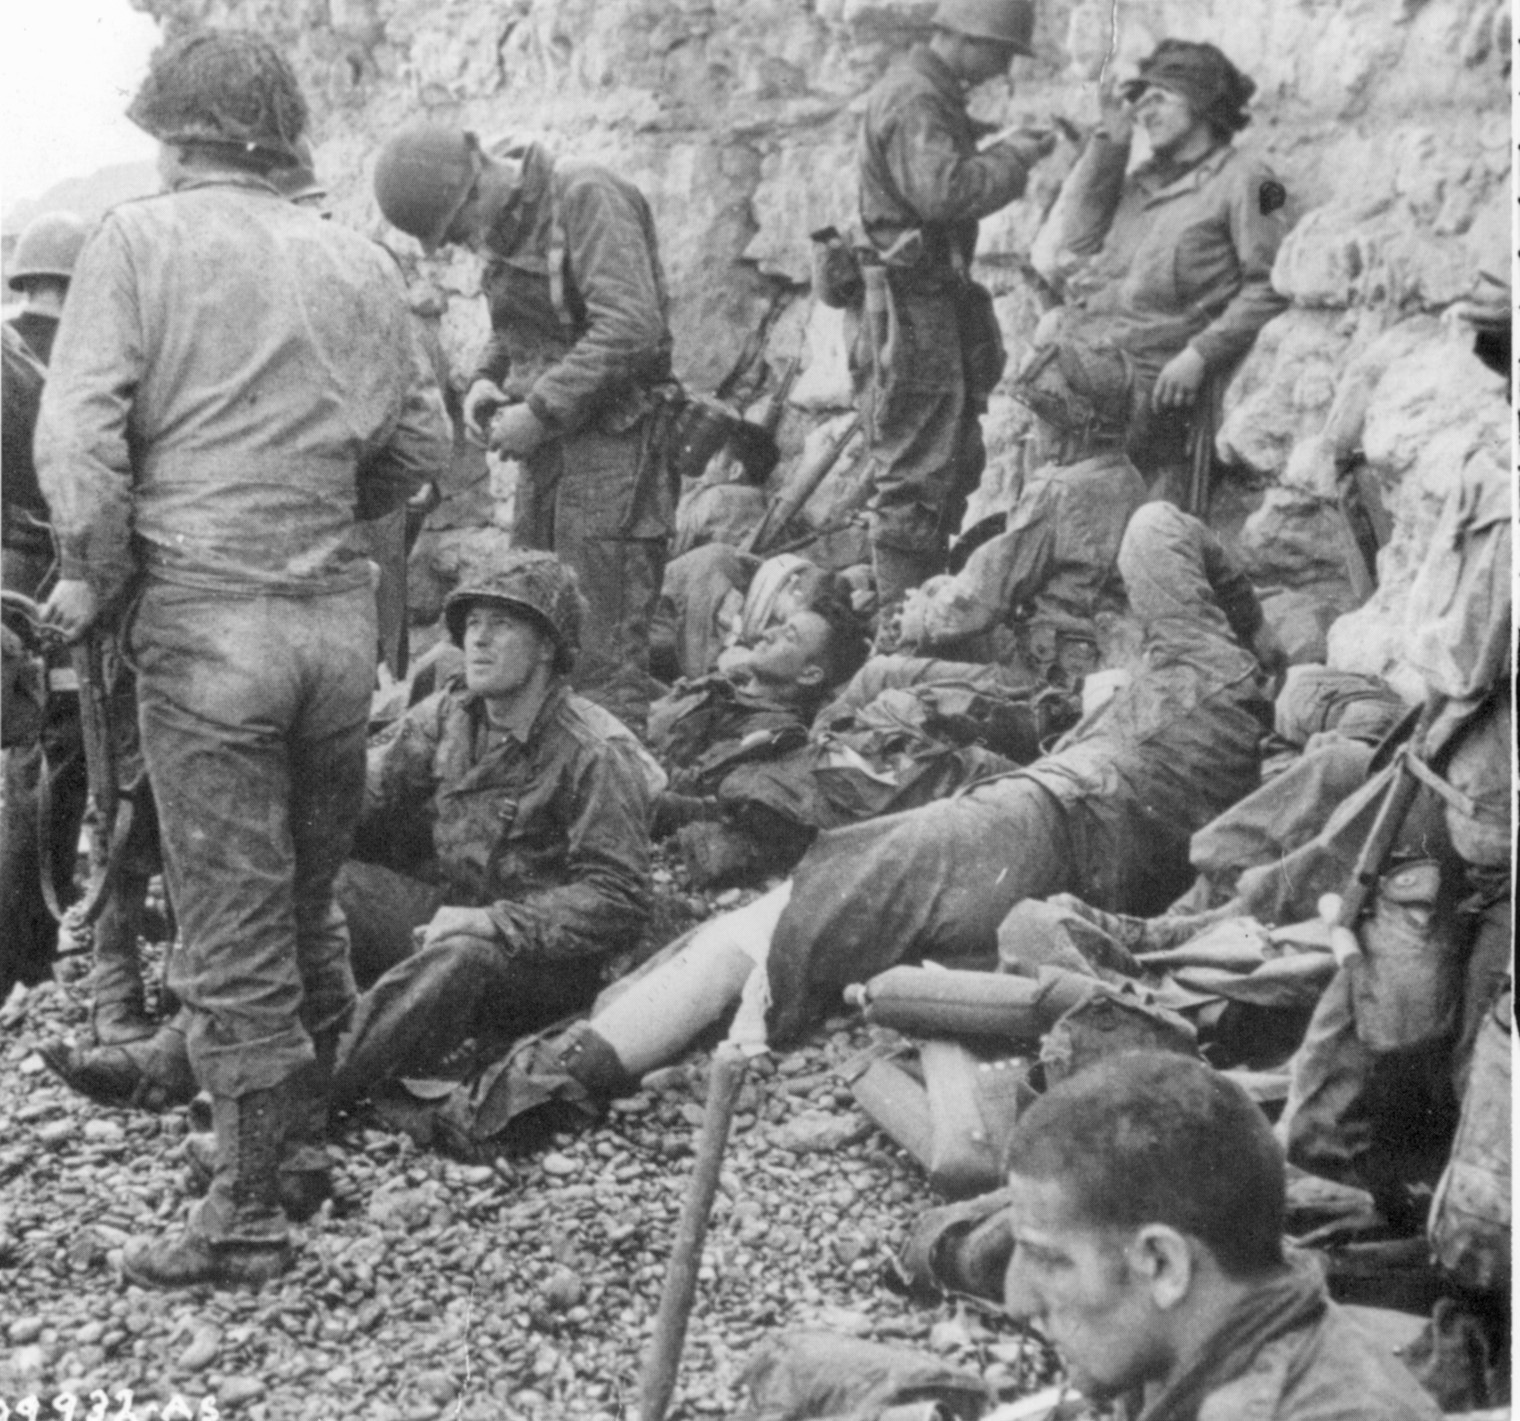 Sheltering against a cliff at the edge of Omaha Beach, members of Company L, 16th Regiment prepare to assault German positions.